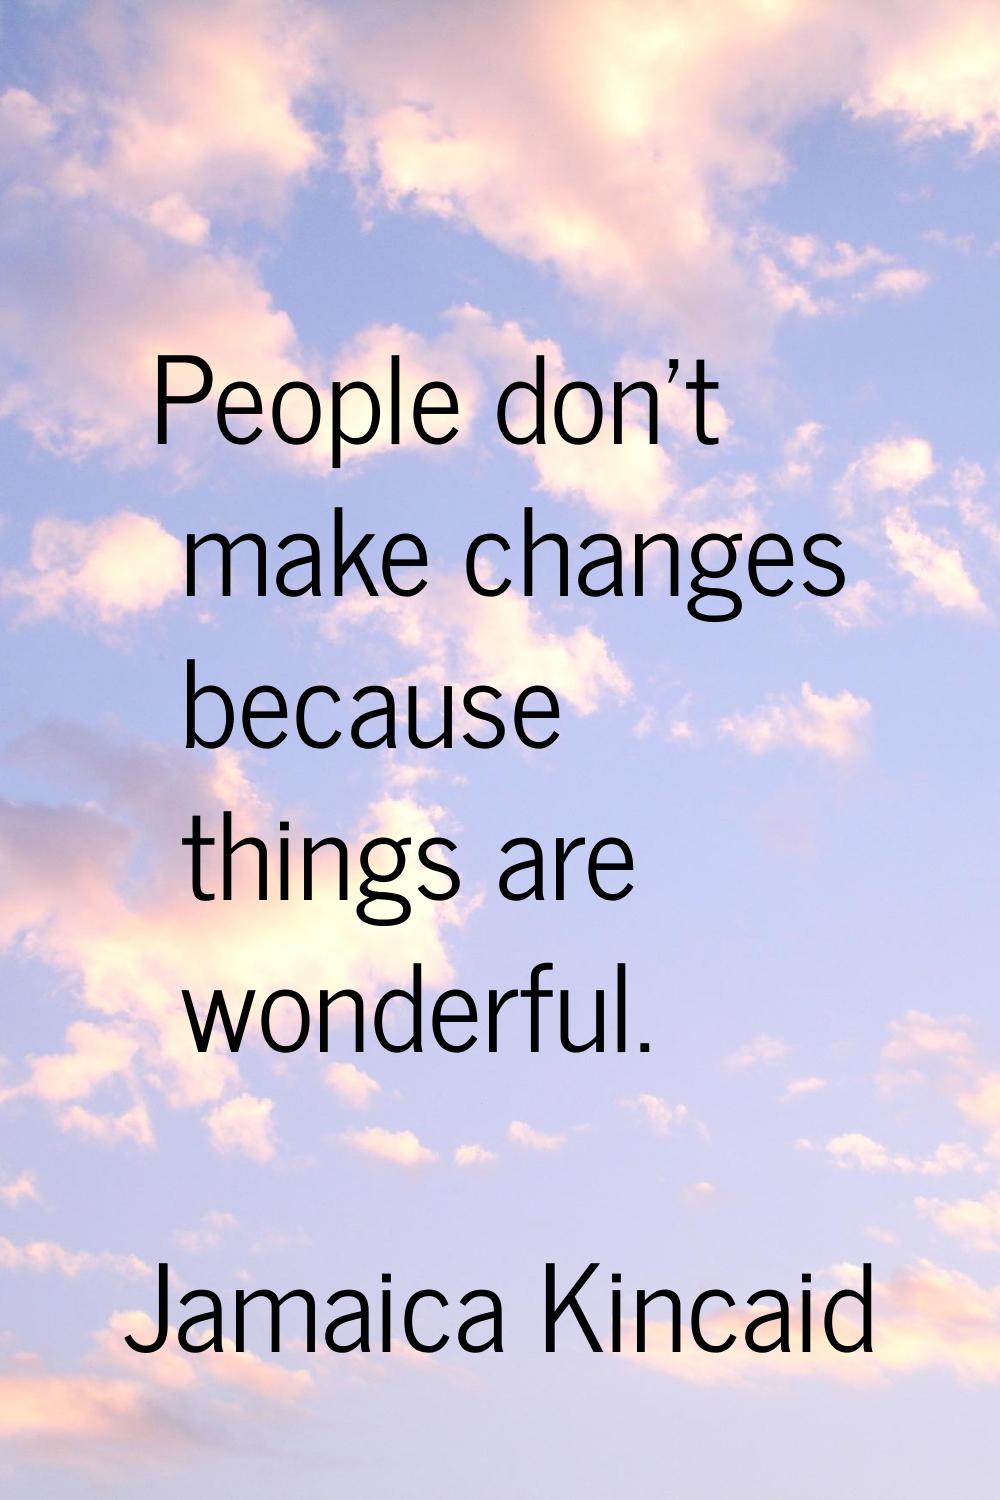 People don't make changes because things are wonderful.